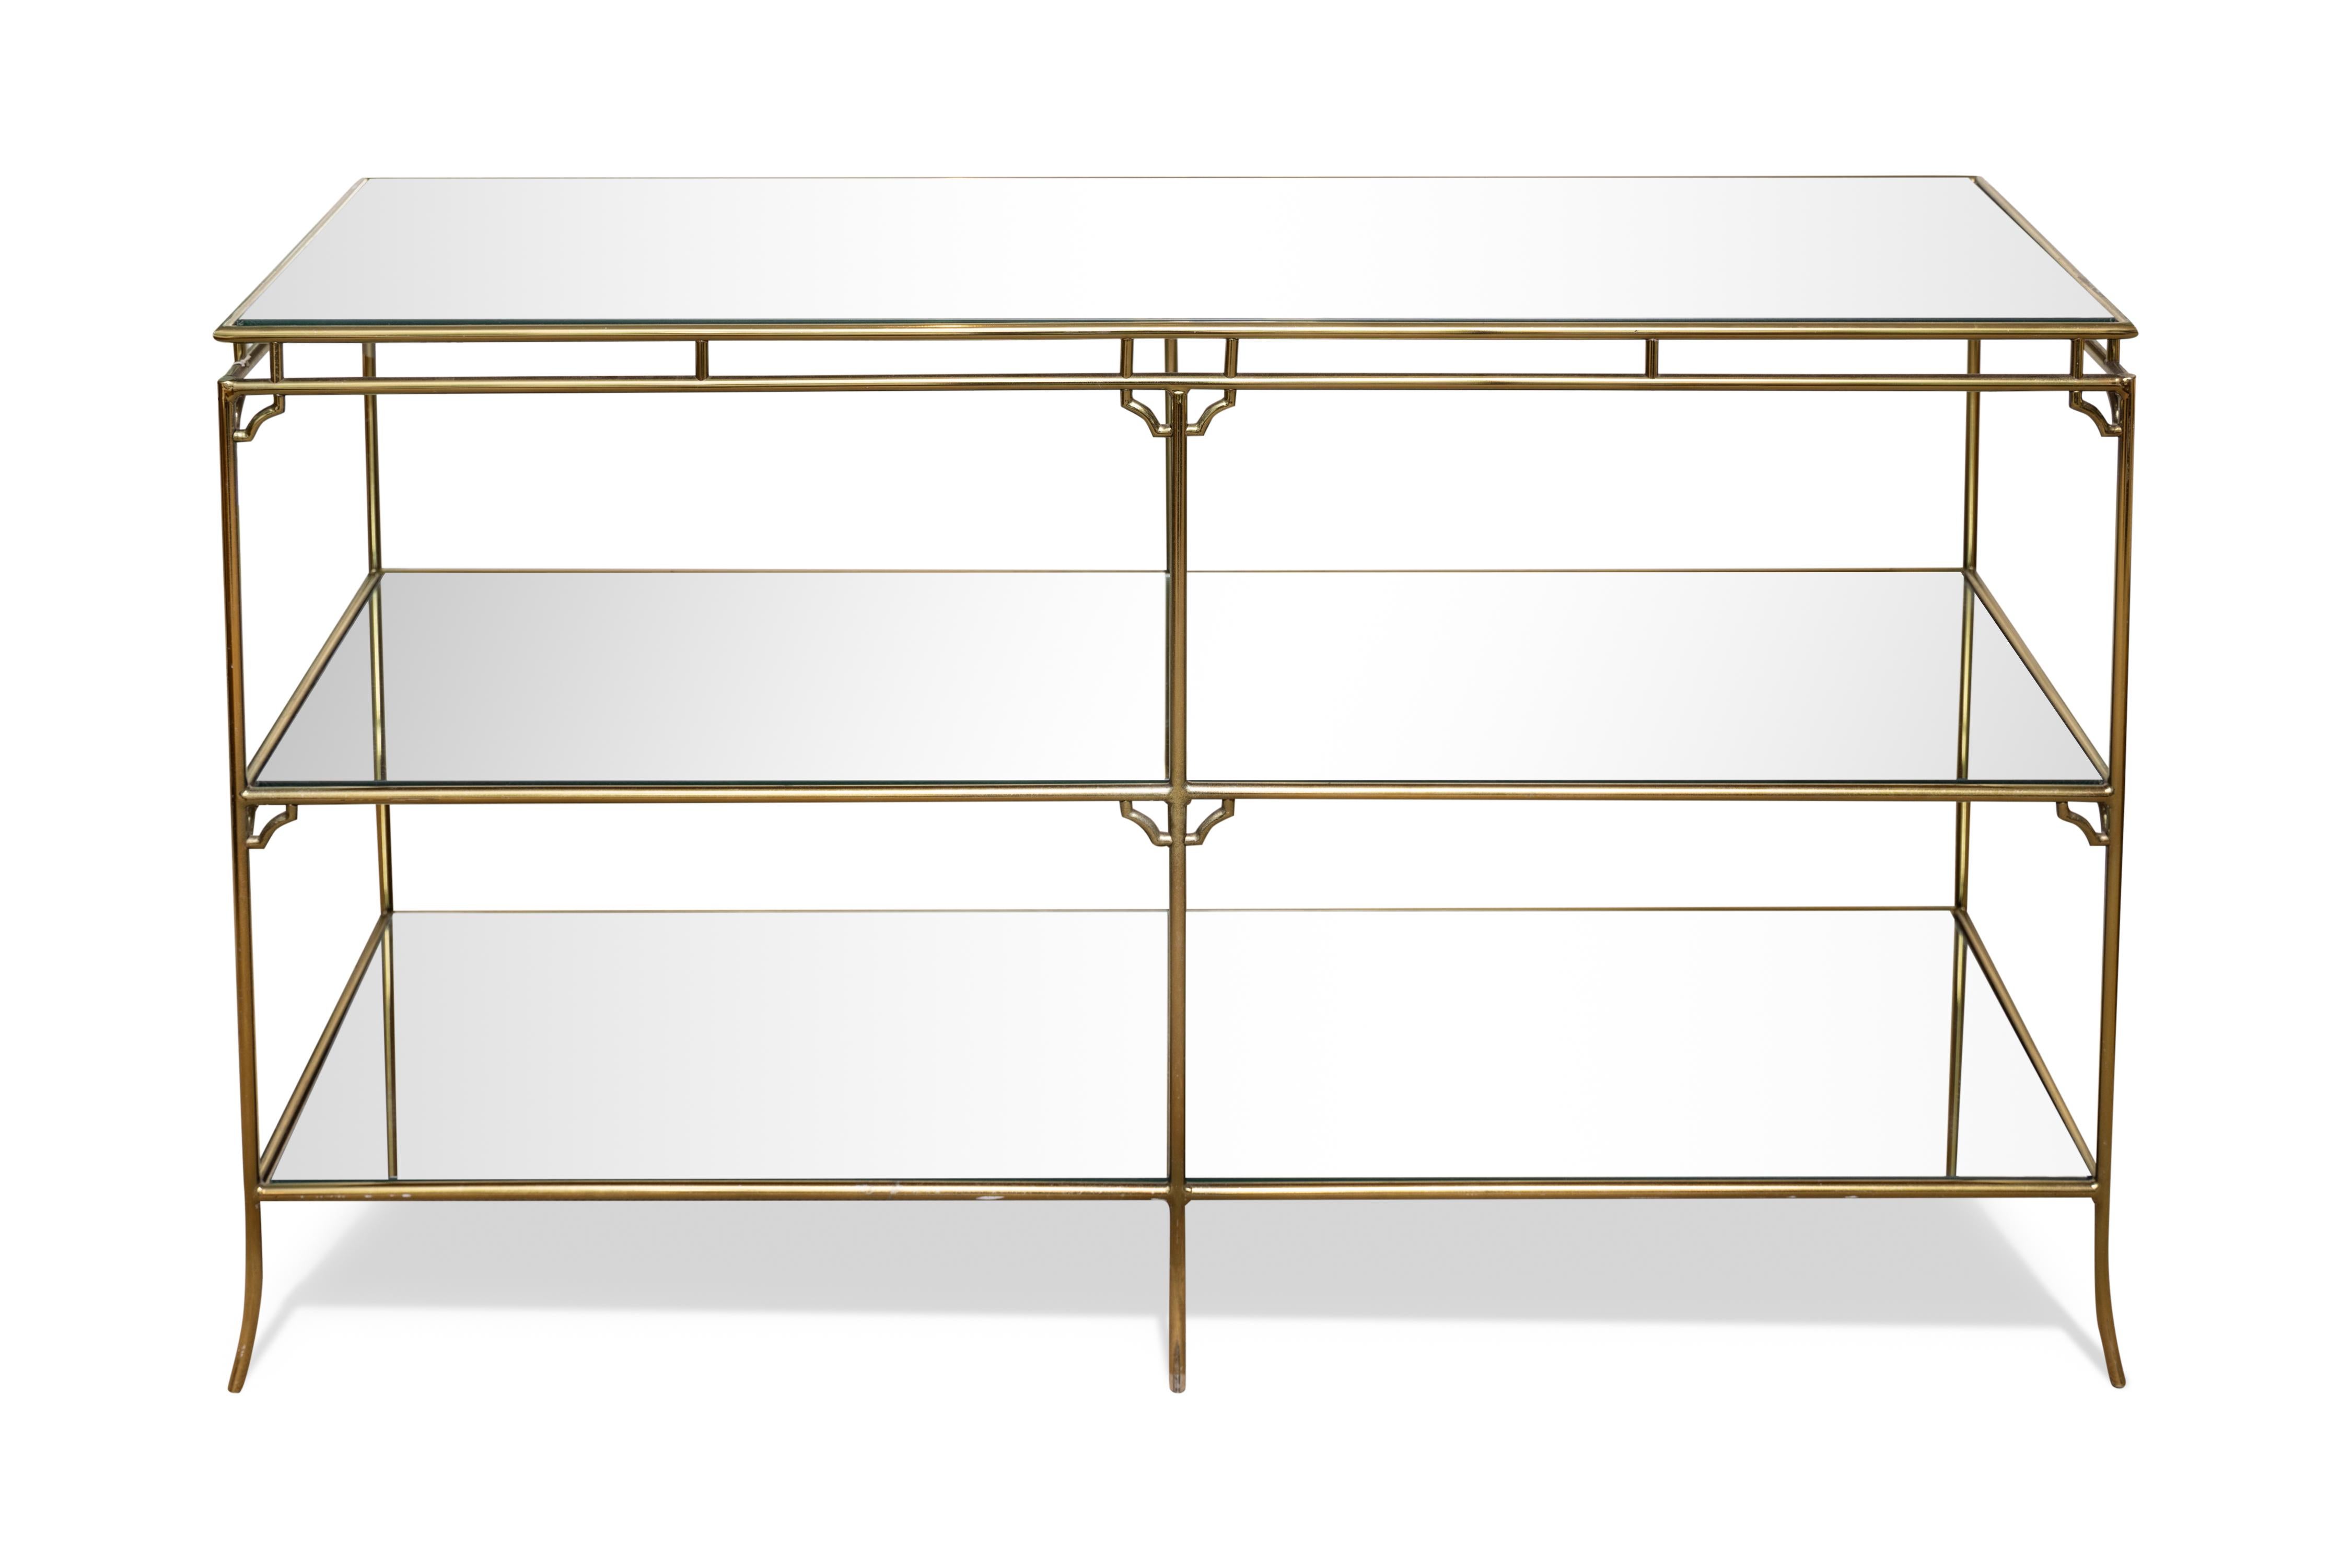 Unknown Vintage Midcentury Three Tier Brass Bamboo Console with Mirrored Shelves